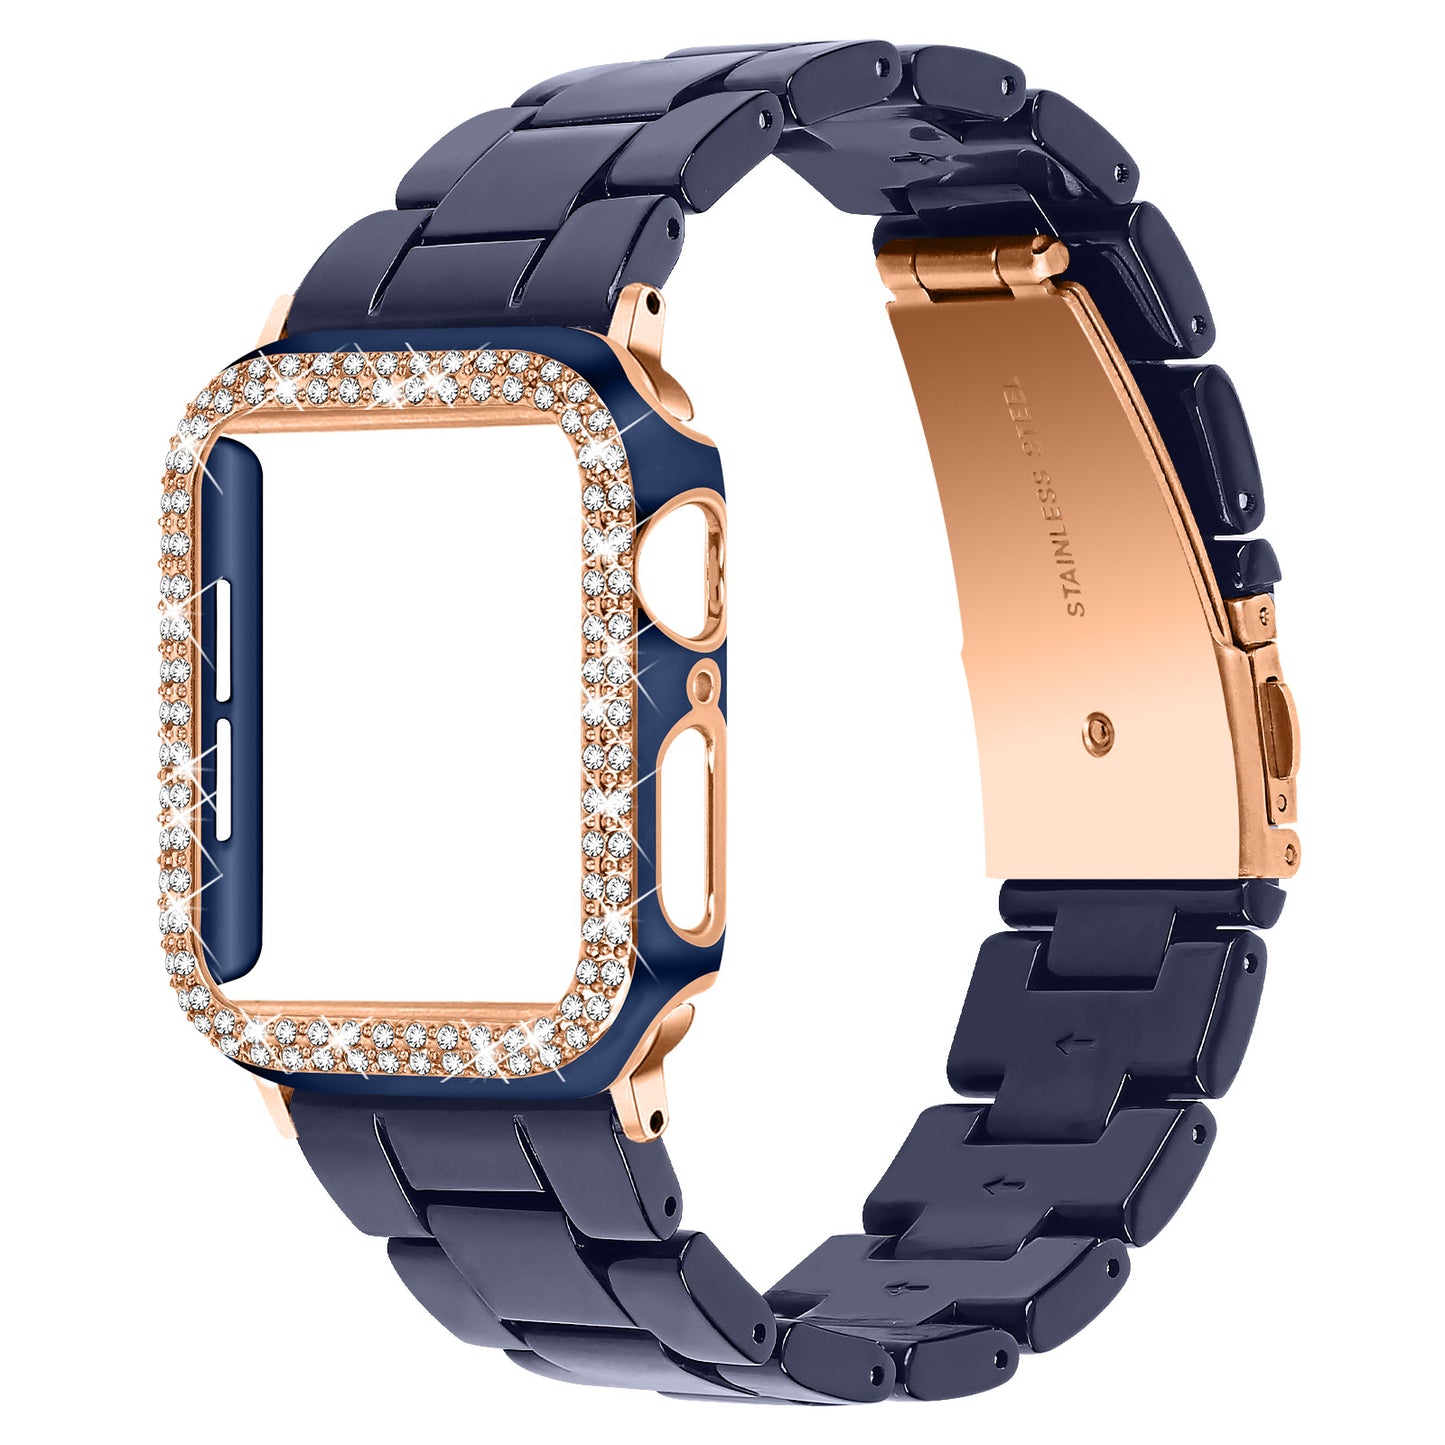 Monaco Resin Band with Case